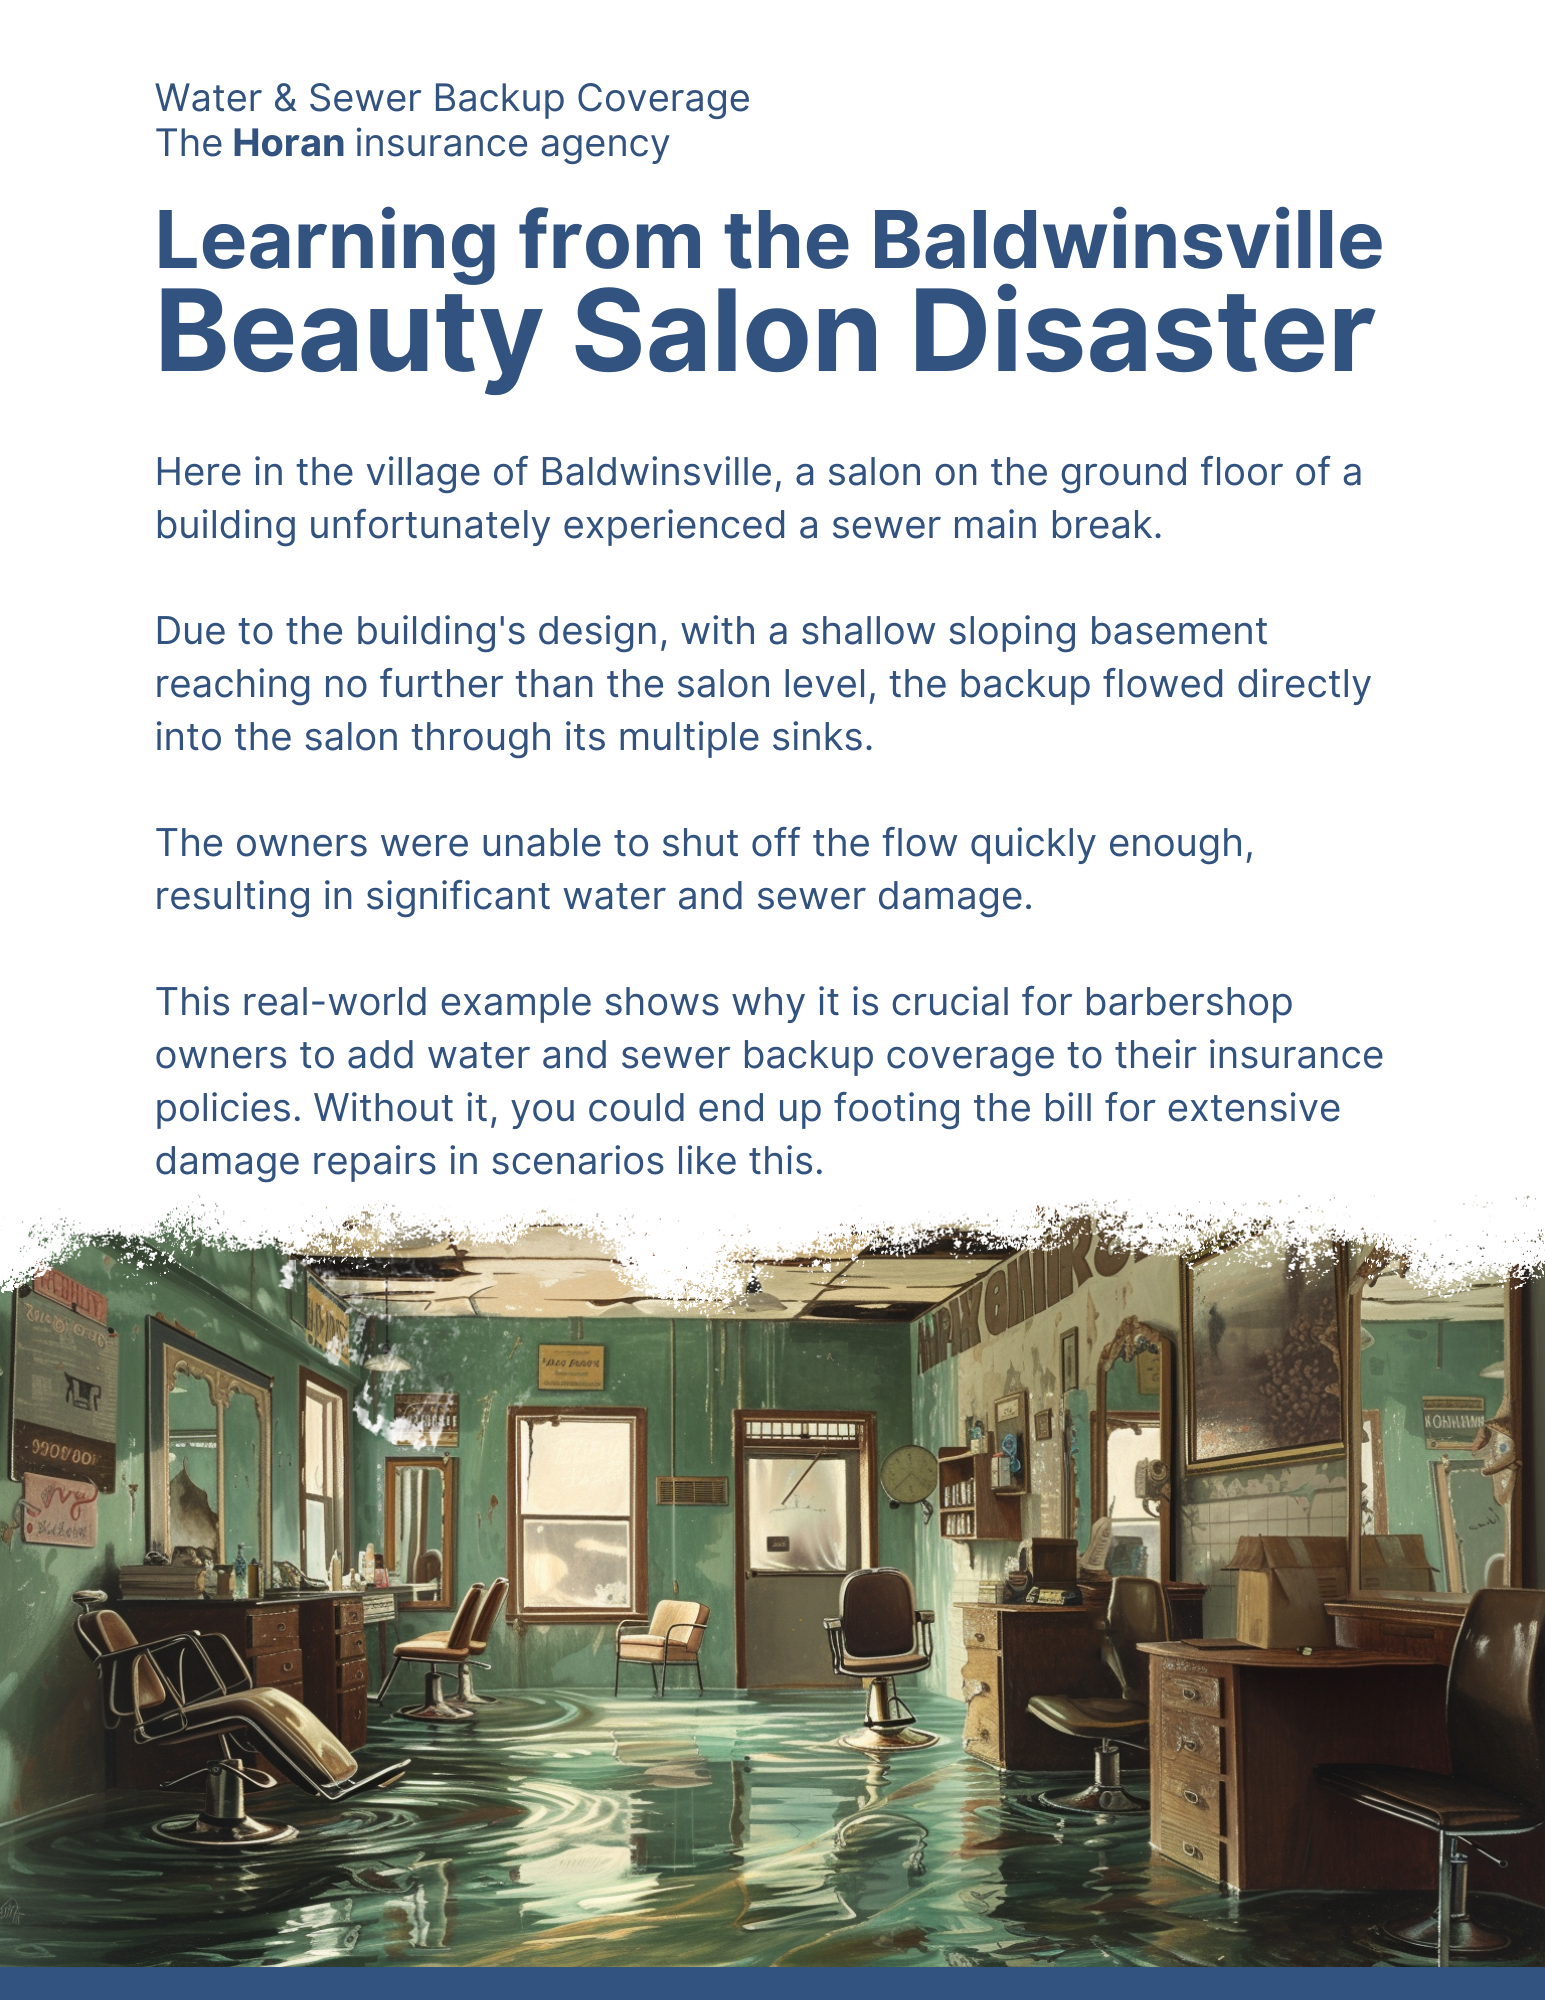 Learning from the Baldwinsville beauty salon disaster